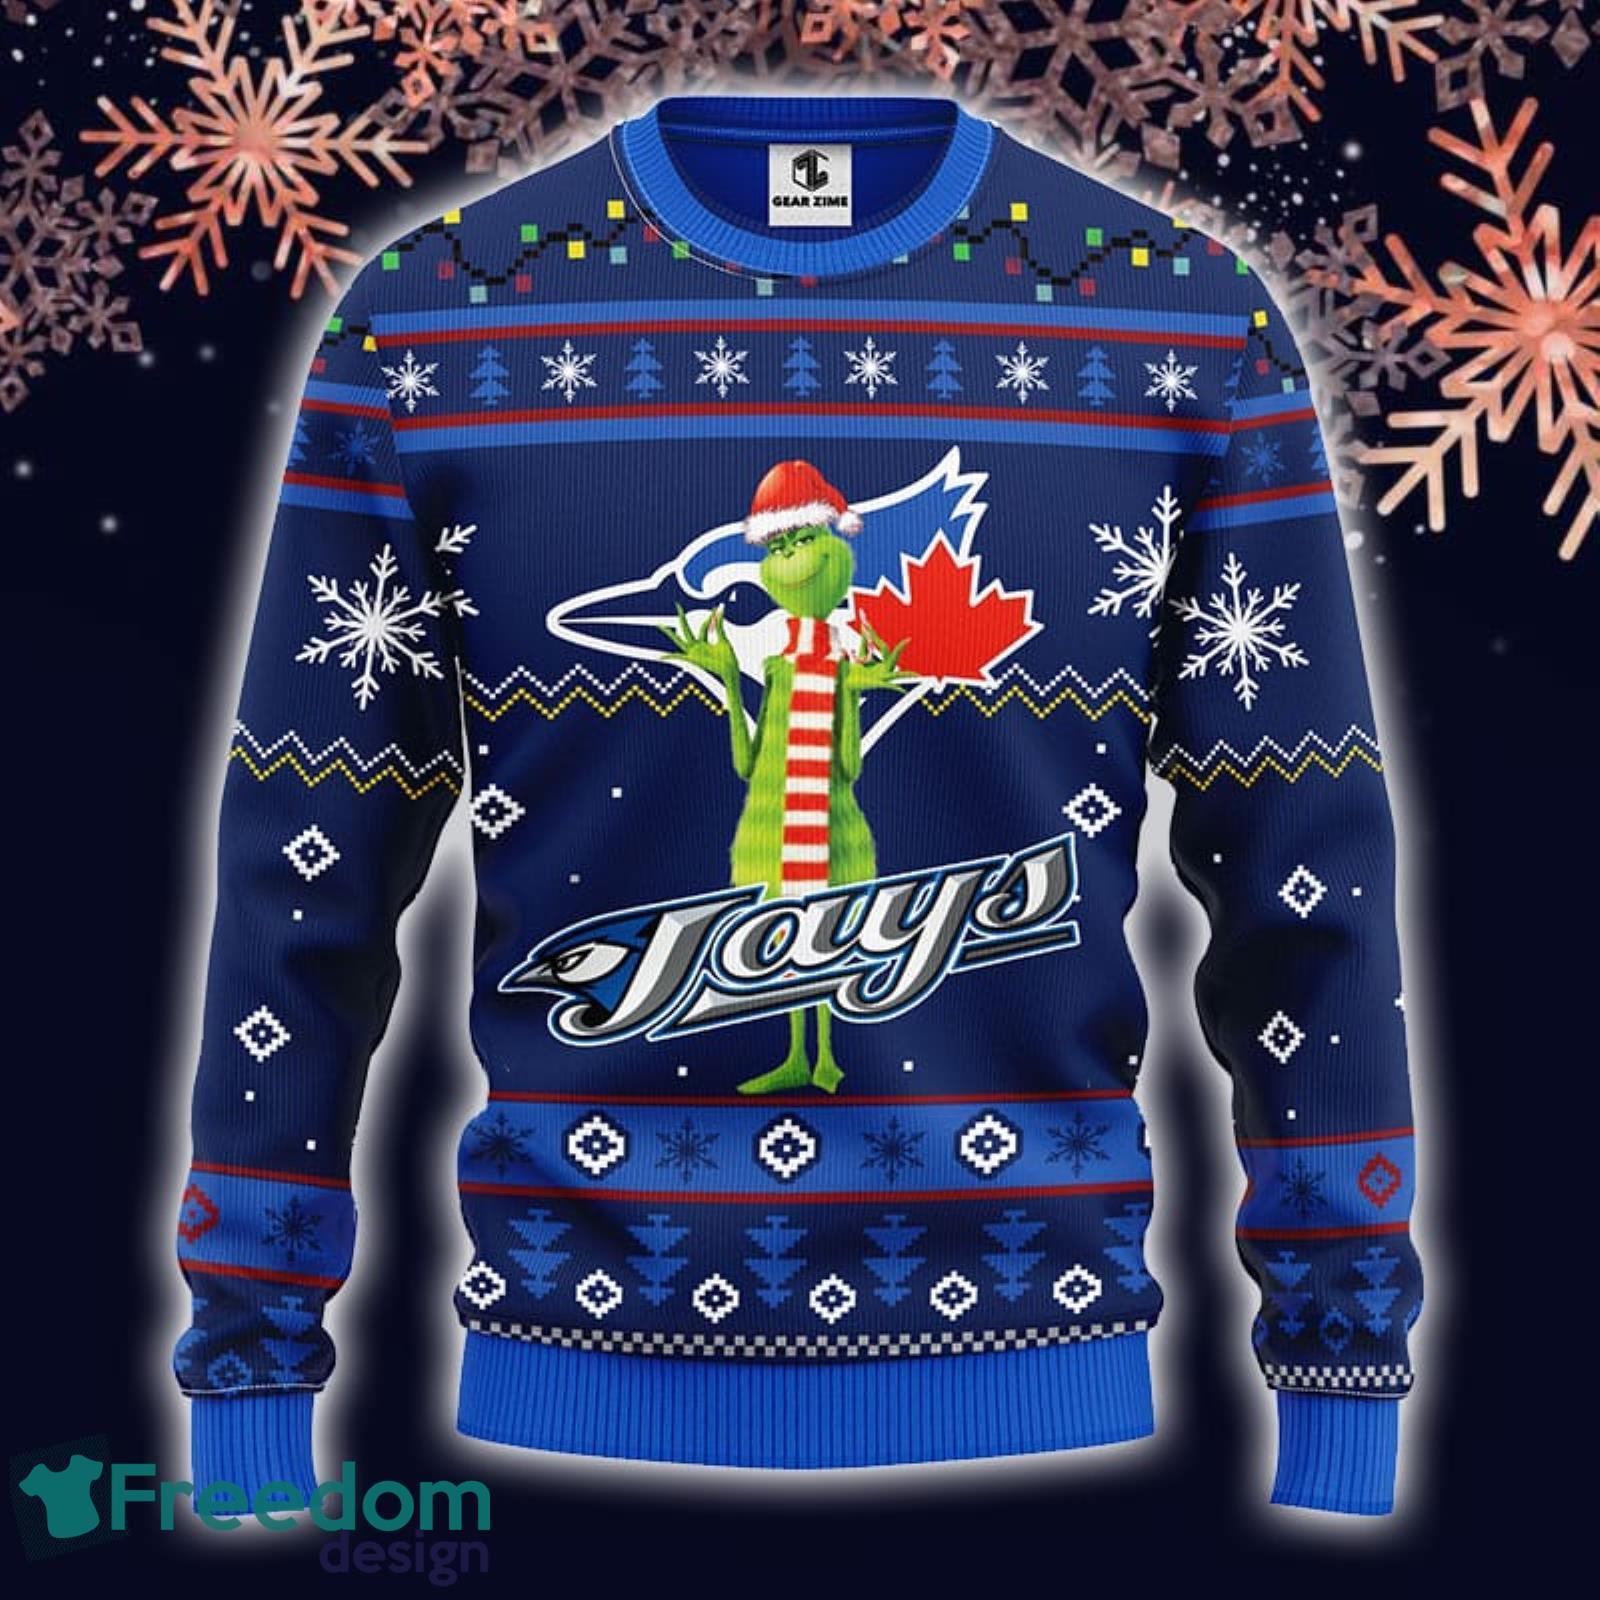 MLB Logo Chicago Cubs Funny Grinch Ideas Ugly Christmas Sweater Gift For  Fans - Banantees